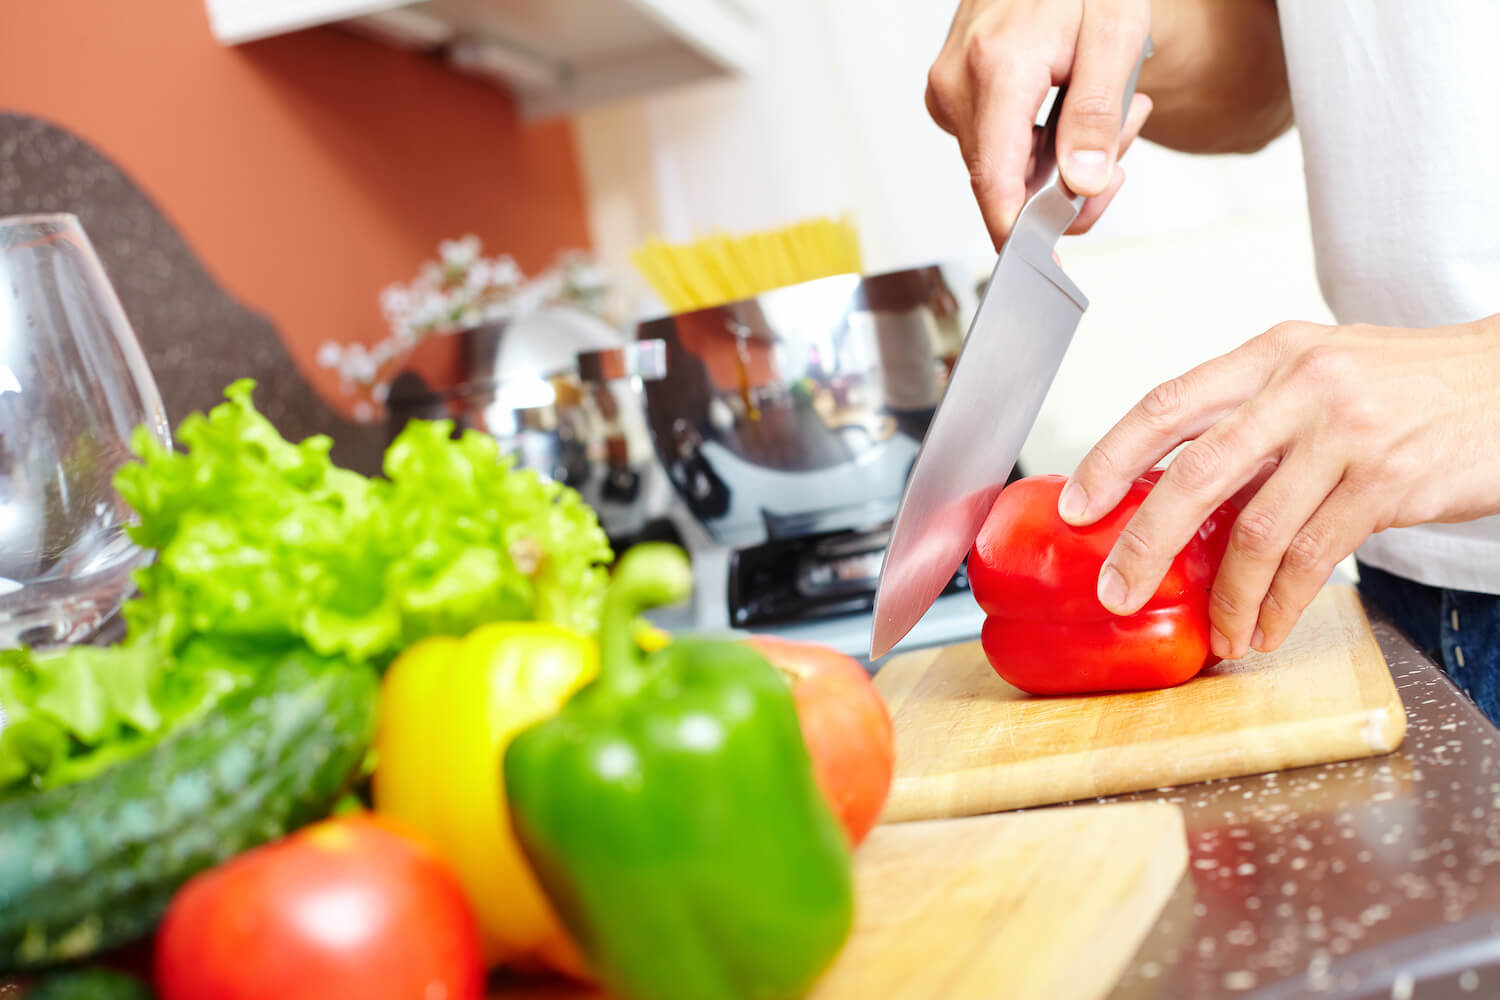 Why You Should Consider Hiring a Personal Chef Over a Private Chef